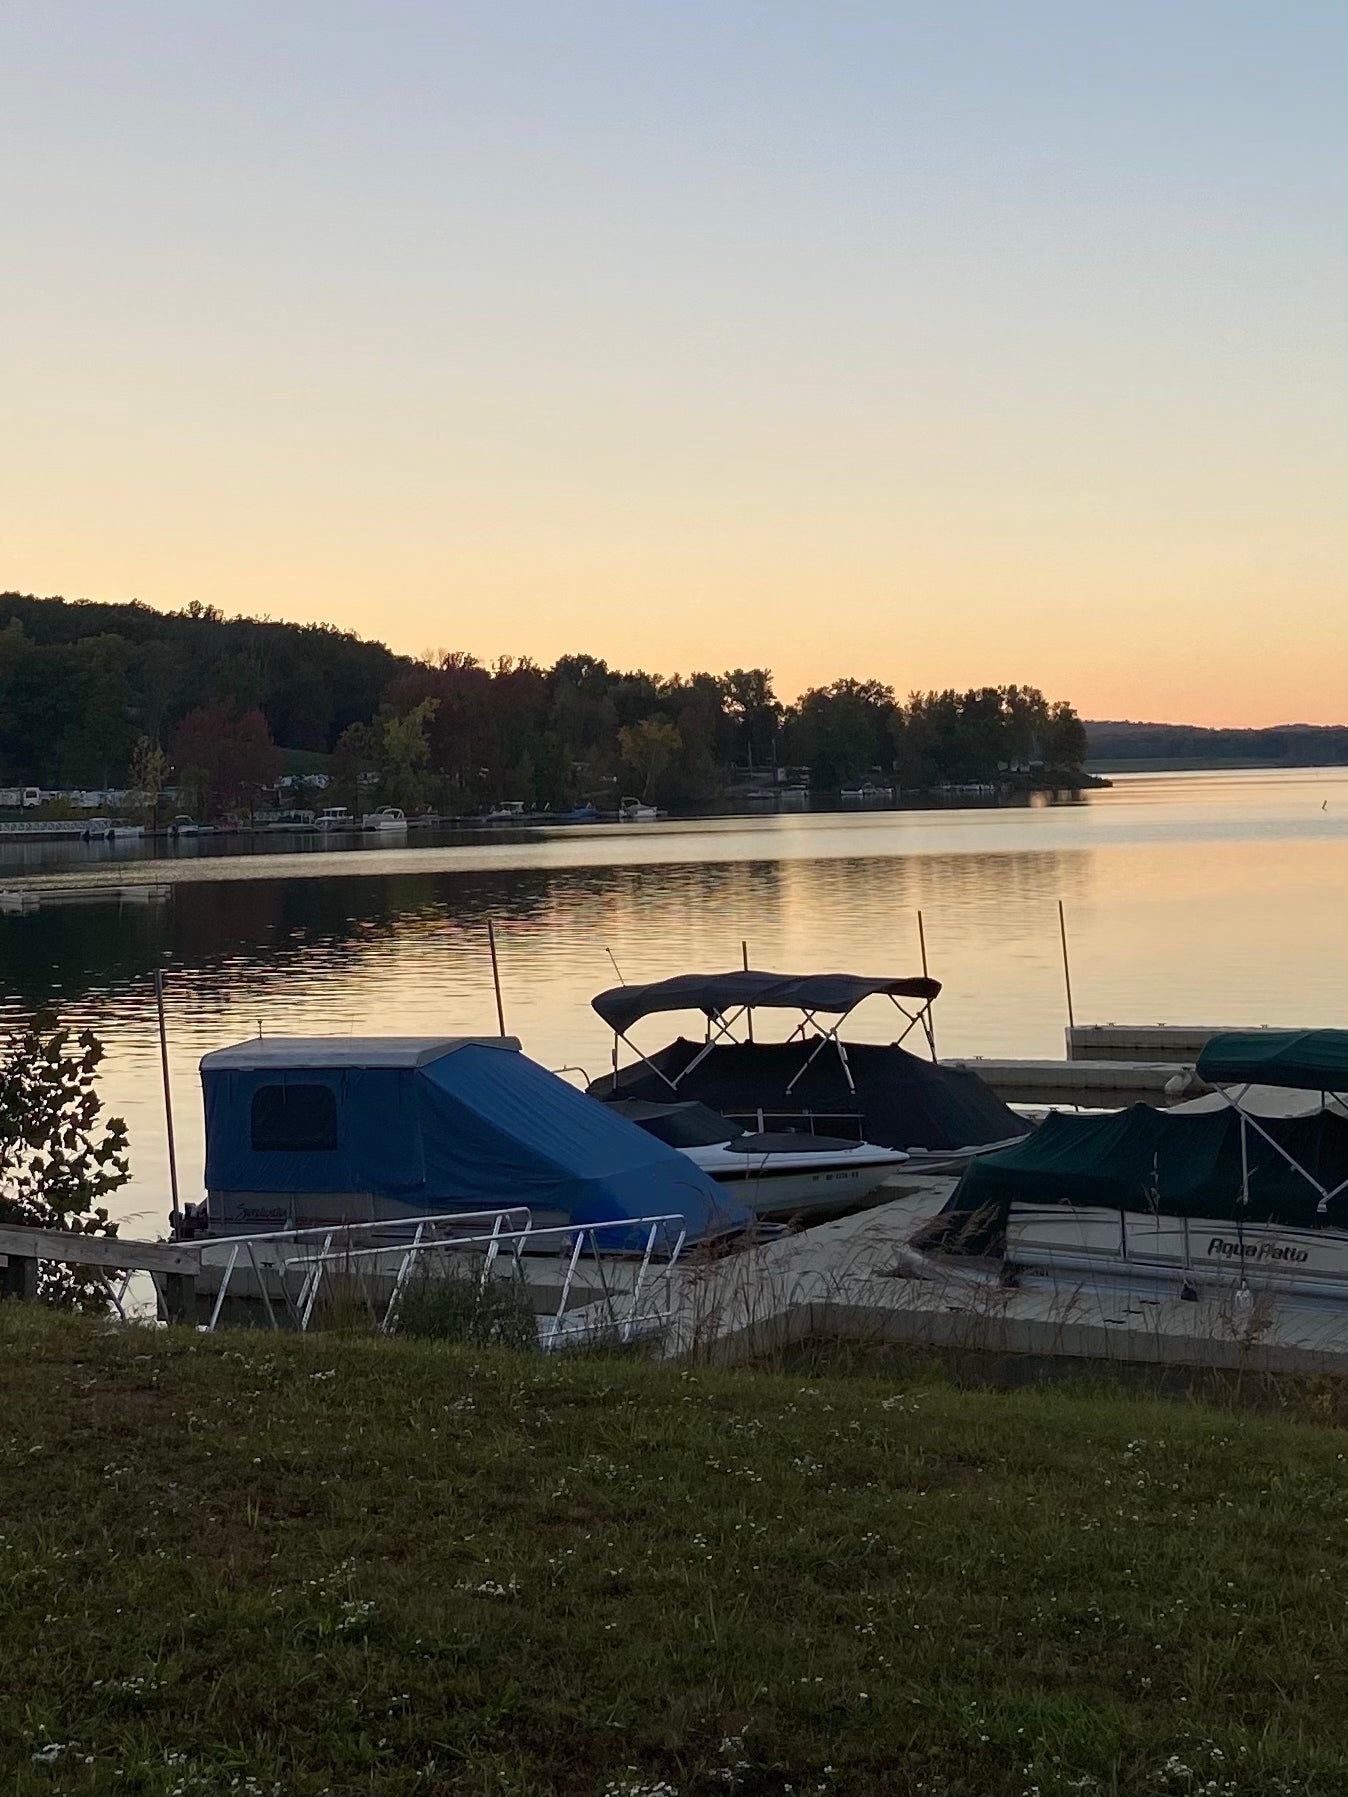 Camper submitted image from Seneca Lake Park - 3